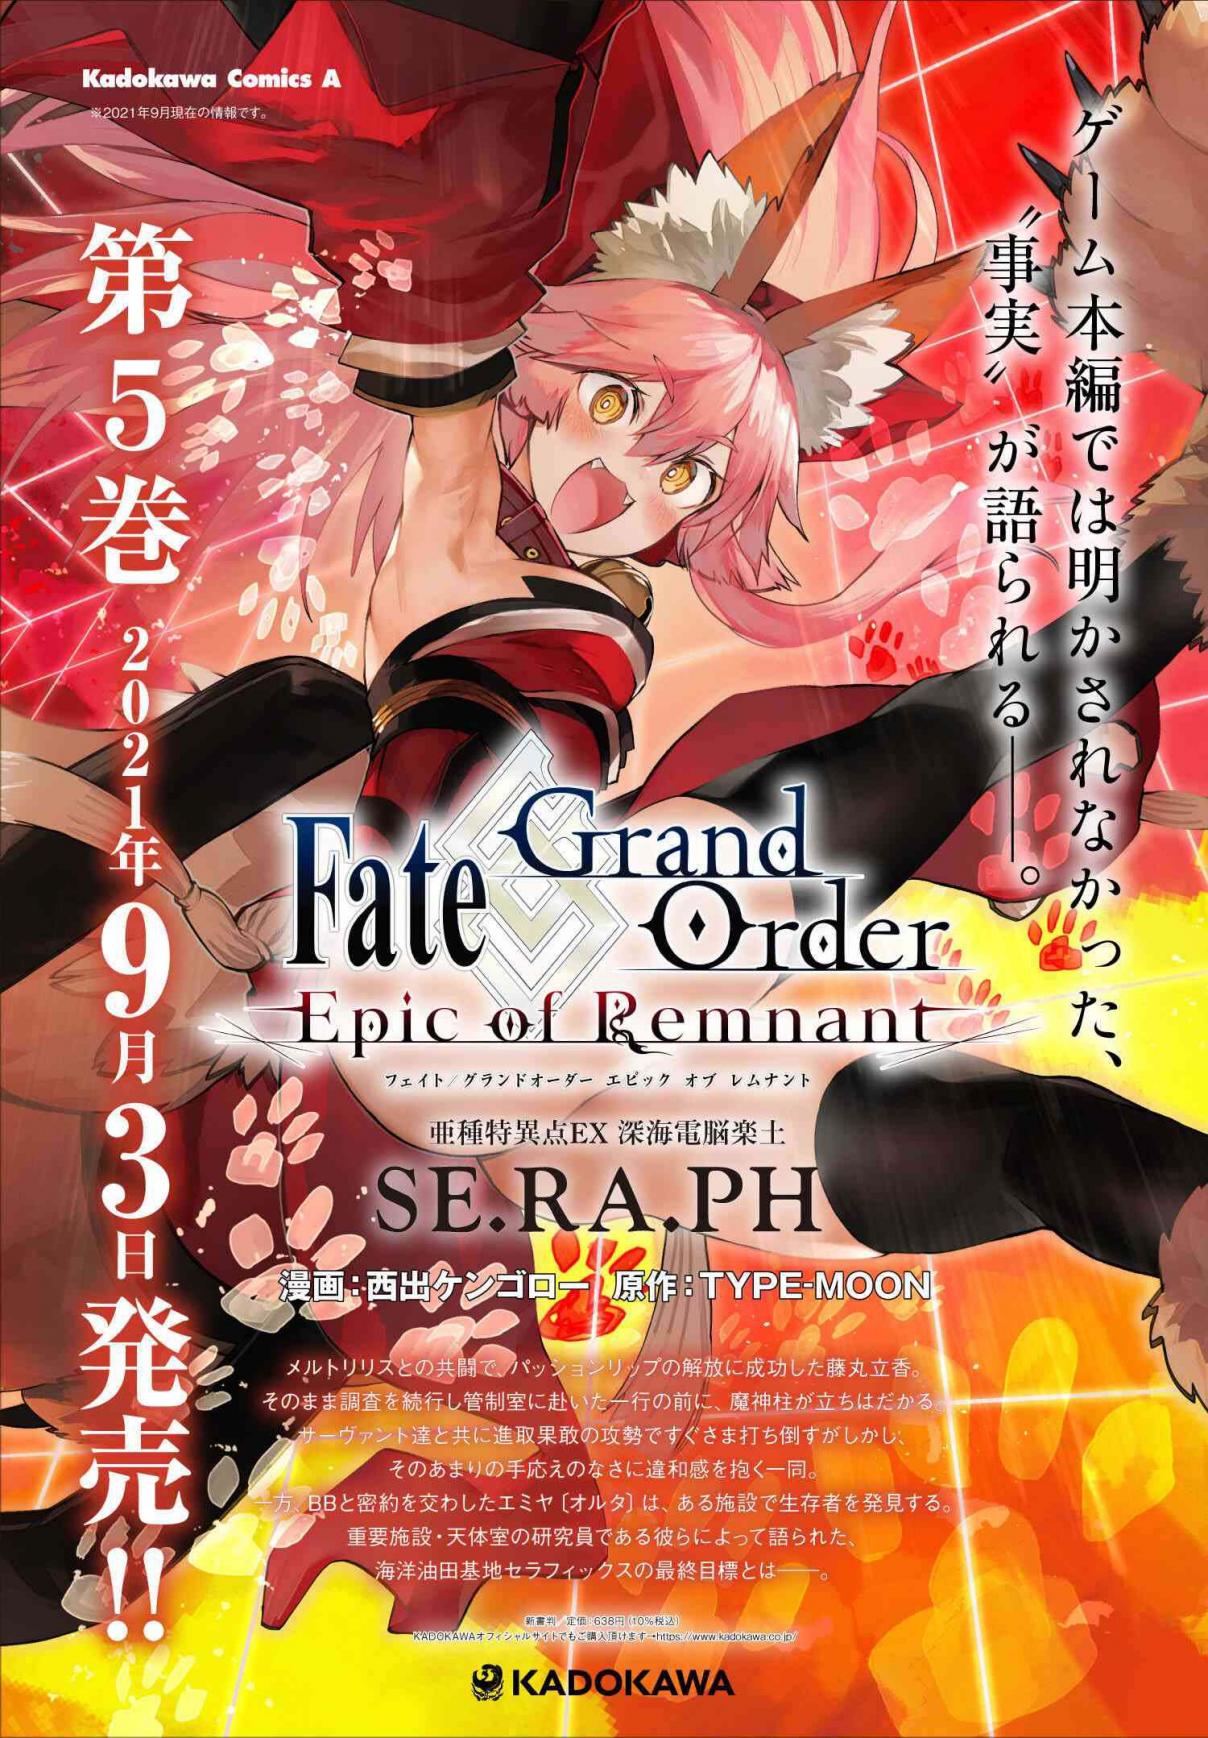 Fate/Grand Order: Epic of Remnant - Deep Sea Cyber-Paradise SE.RA.PH 23.2